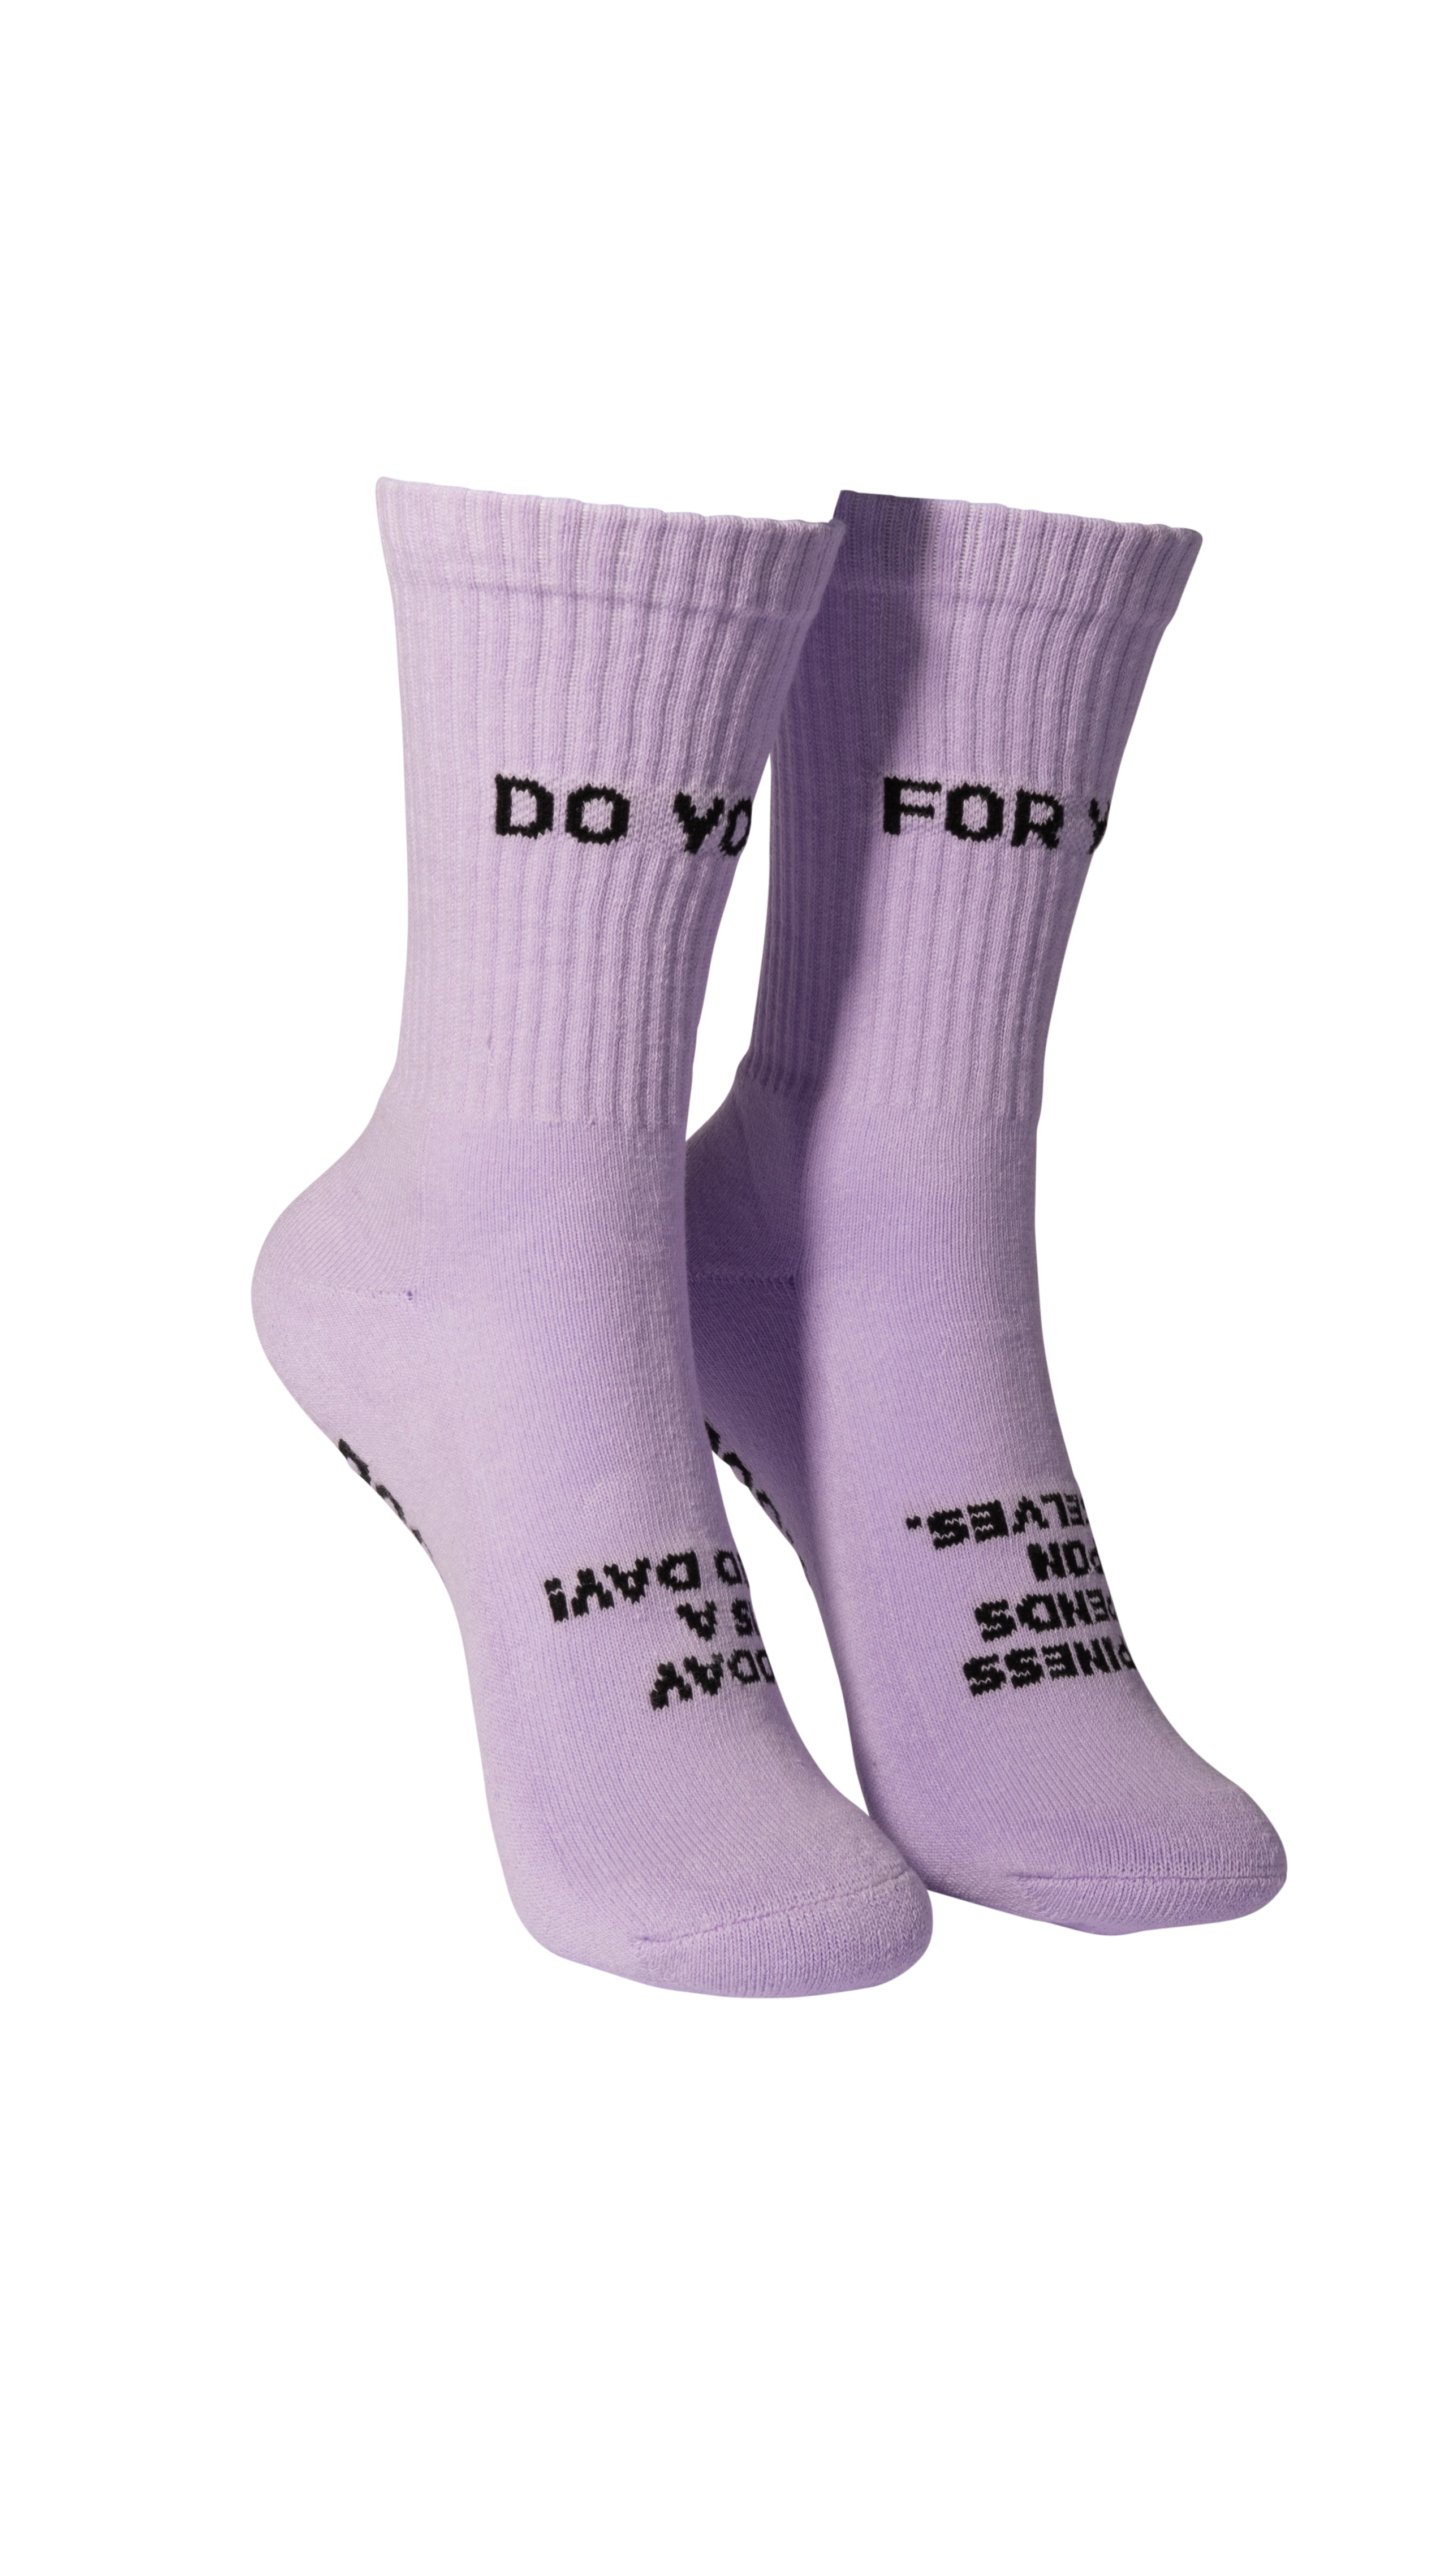 FOR YOU Women's Crew Socks - Lilac